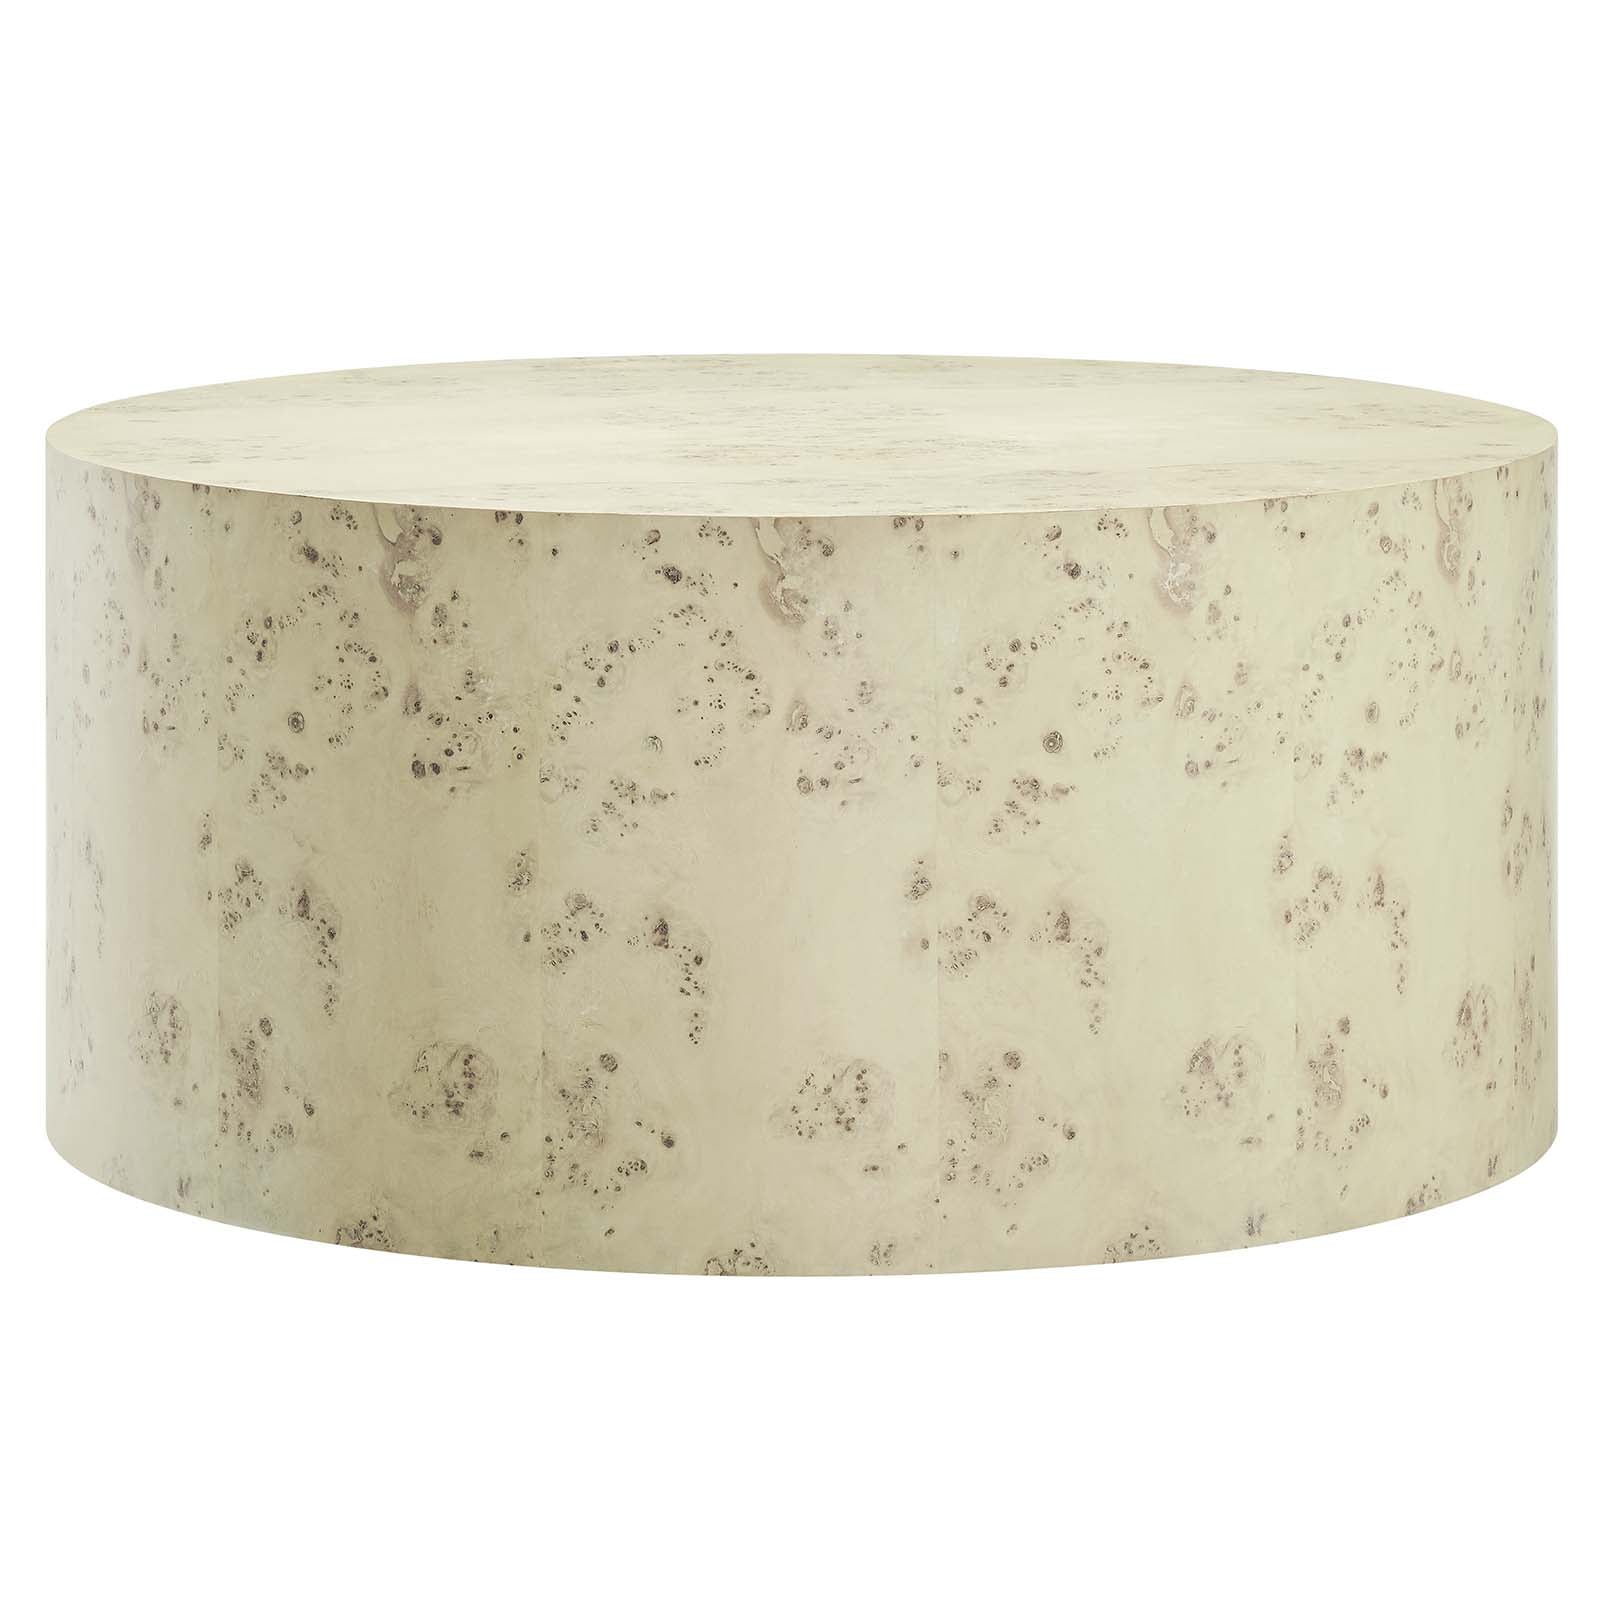 Cosmos 35" Round Burl Wood Coffee Table - East Shore Modern Home Furnishings